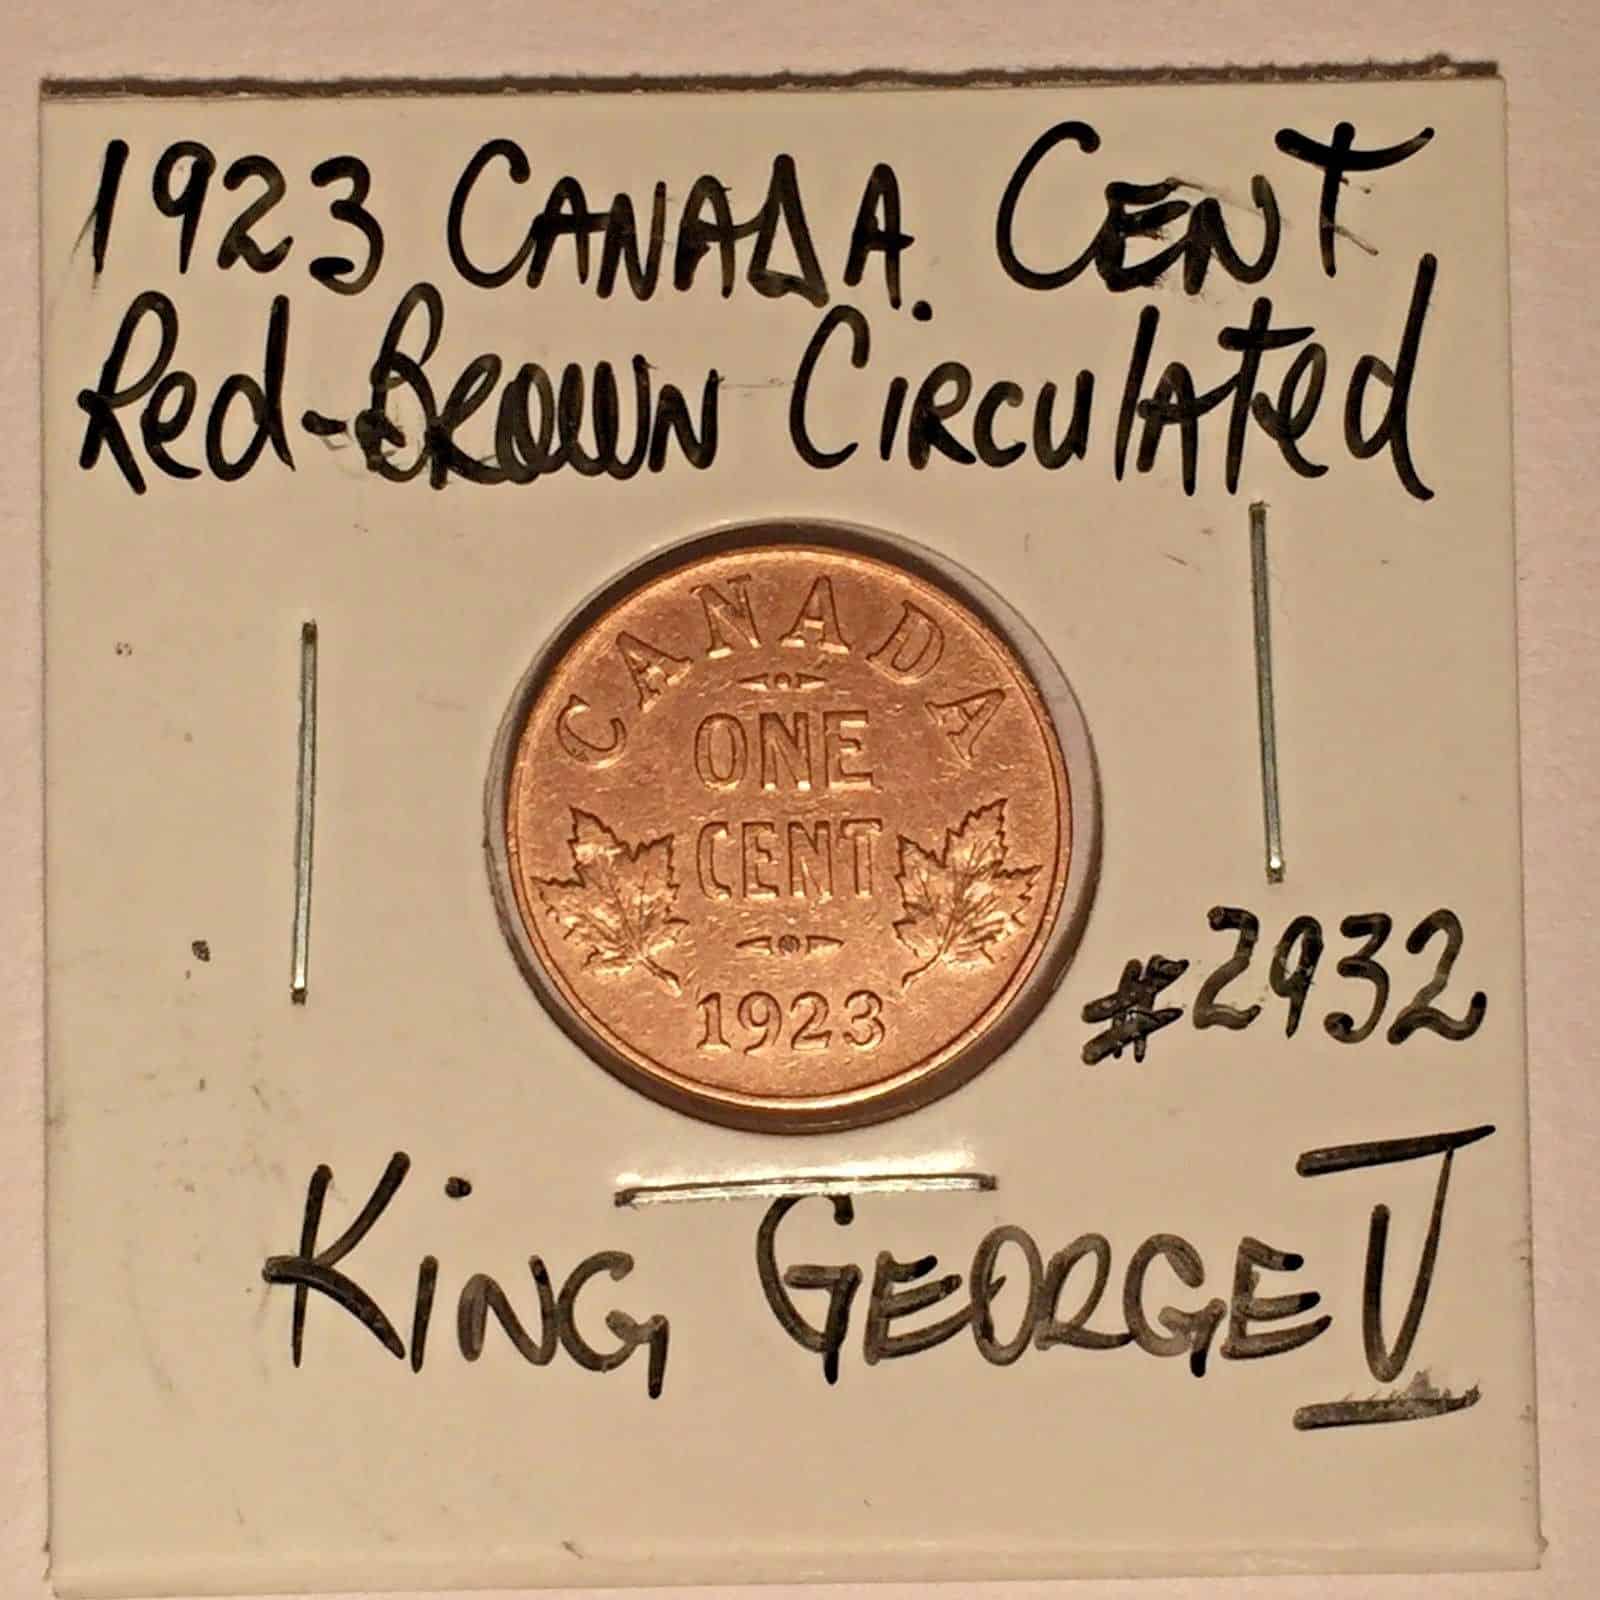 1923 Canada Cent Circulated Red-Brown King George V Canadian Penny